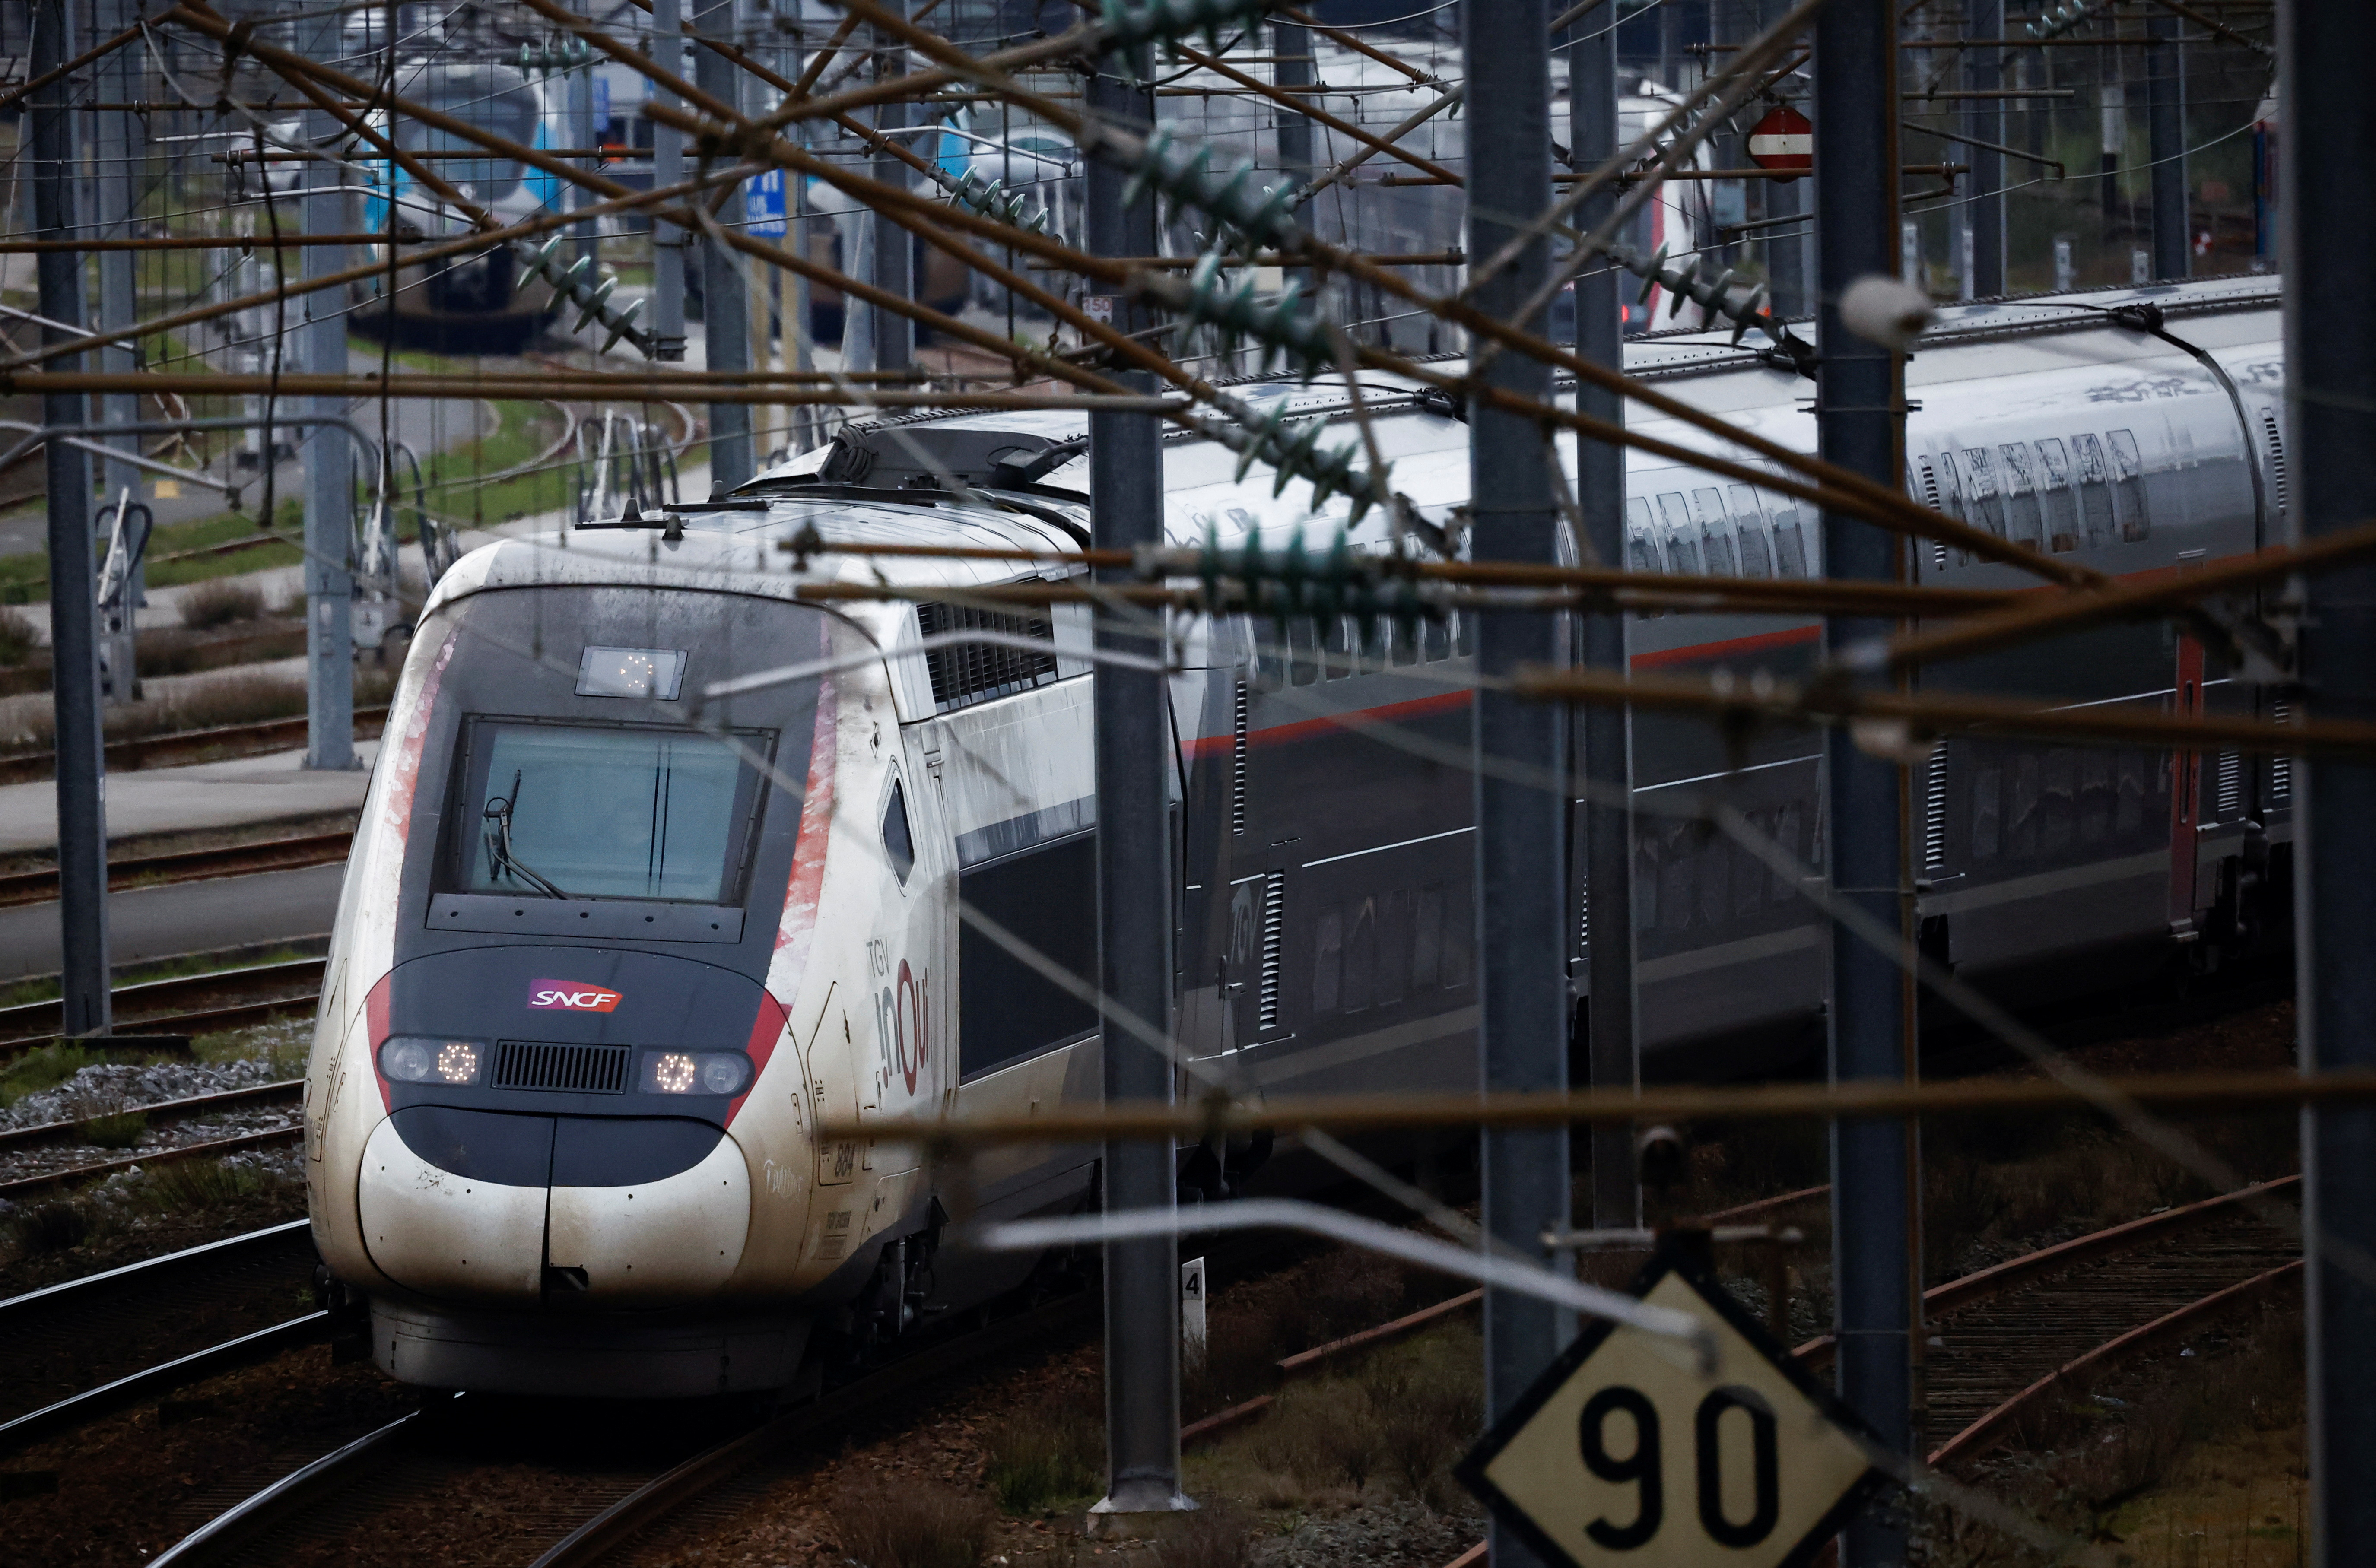 A TGV high speed train is seen at a railway station in Nantes